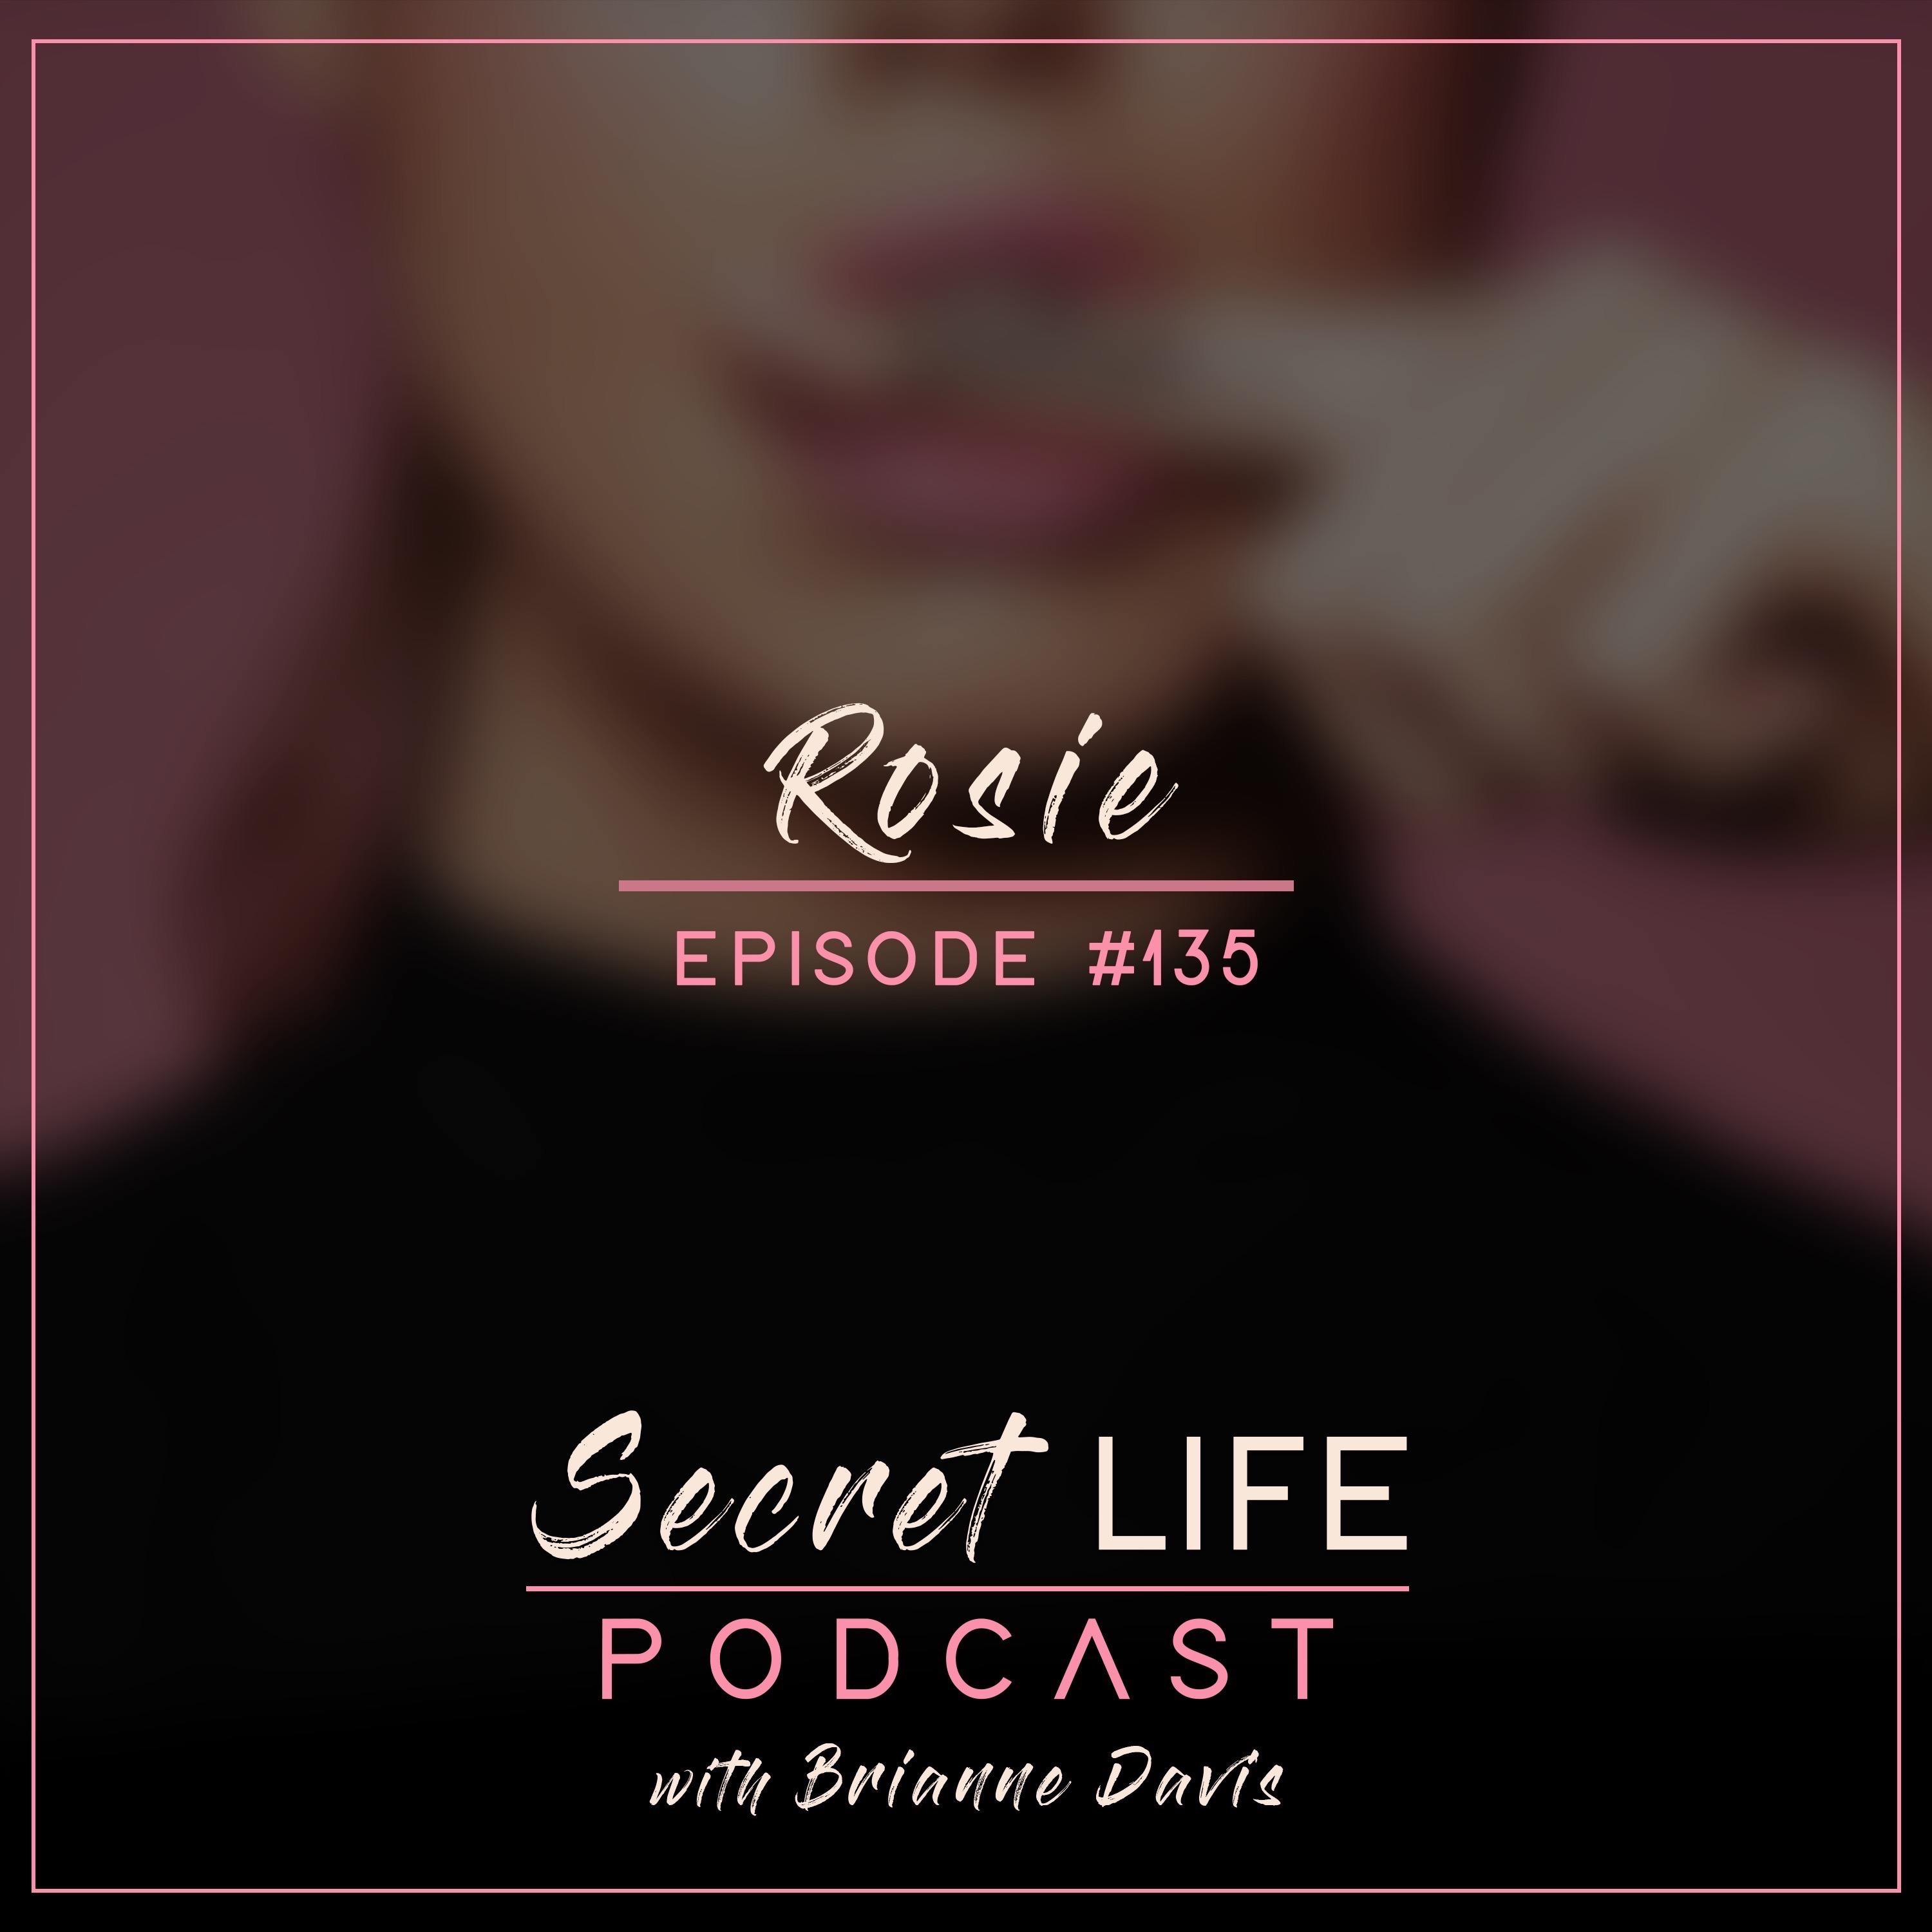 Rosie: Eating Disorder — Body Shaming, Restricting & 18 Months Without a Period